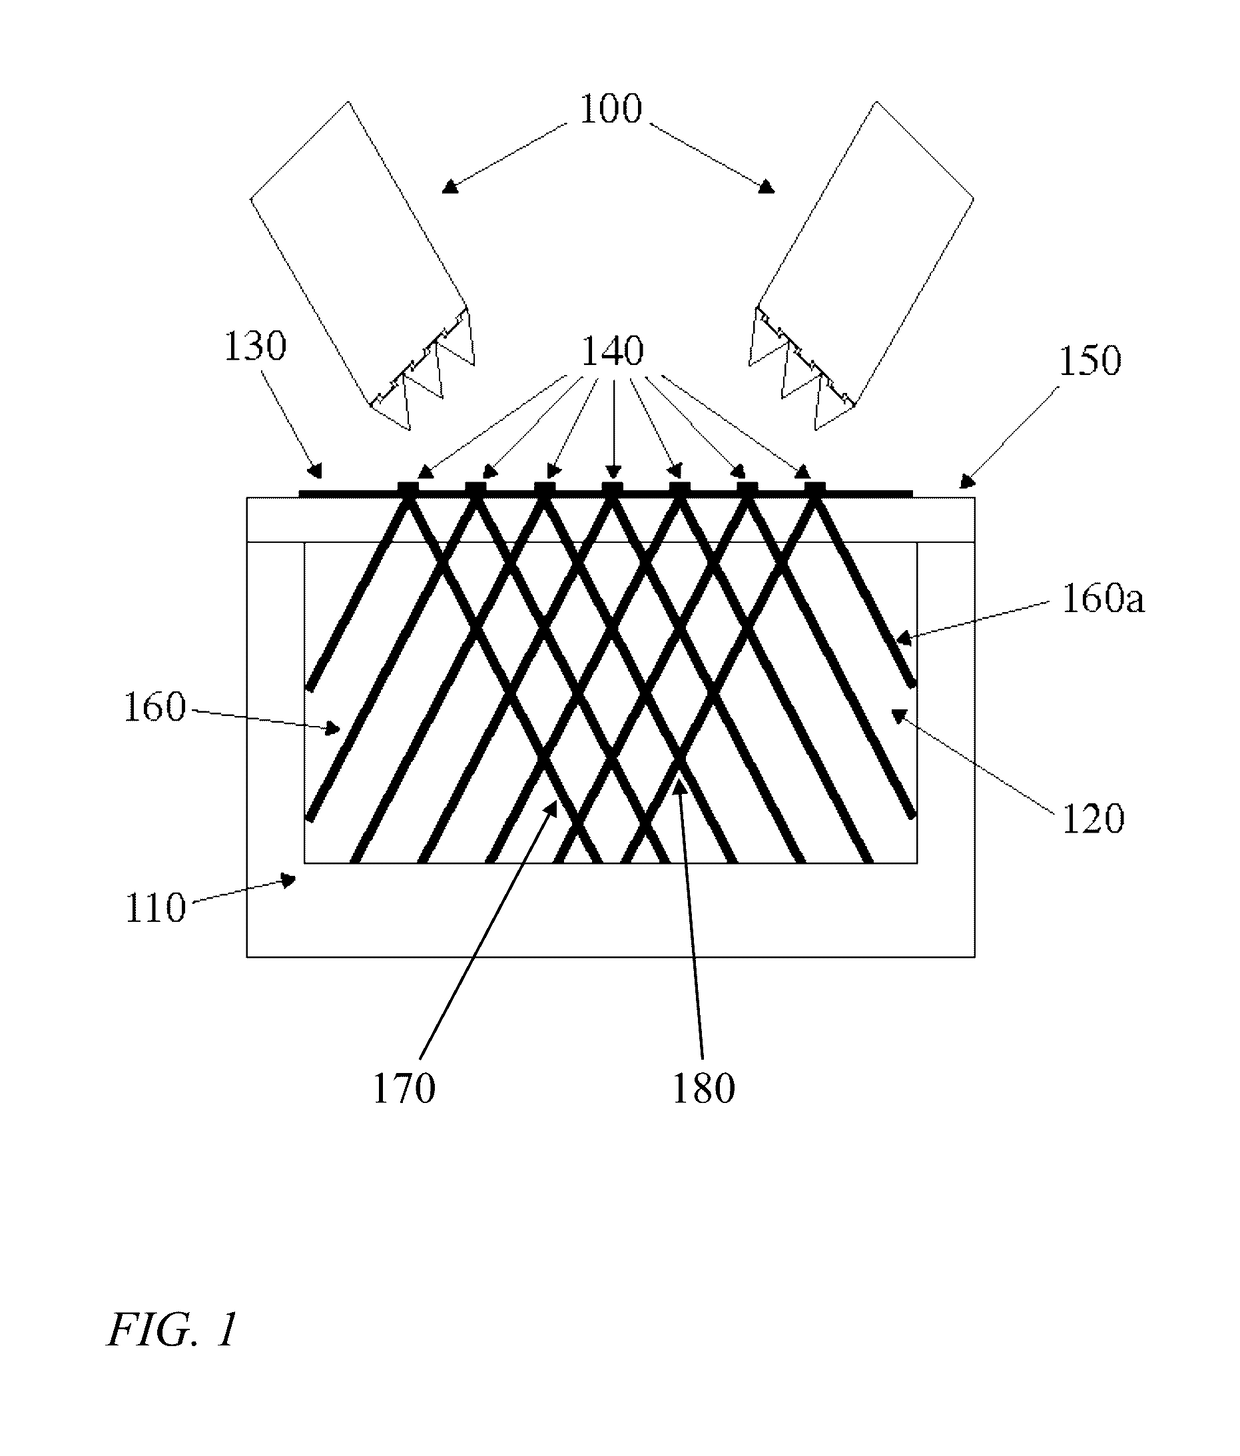 Curved high temperature alloy sandwich panel with a truss core and fabrication method